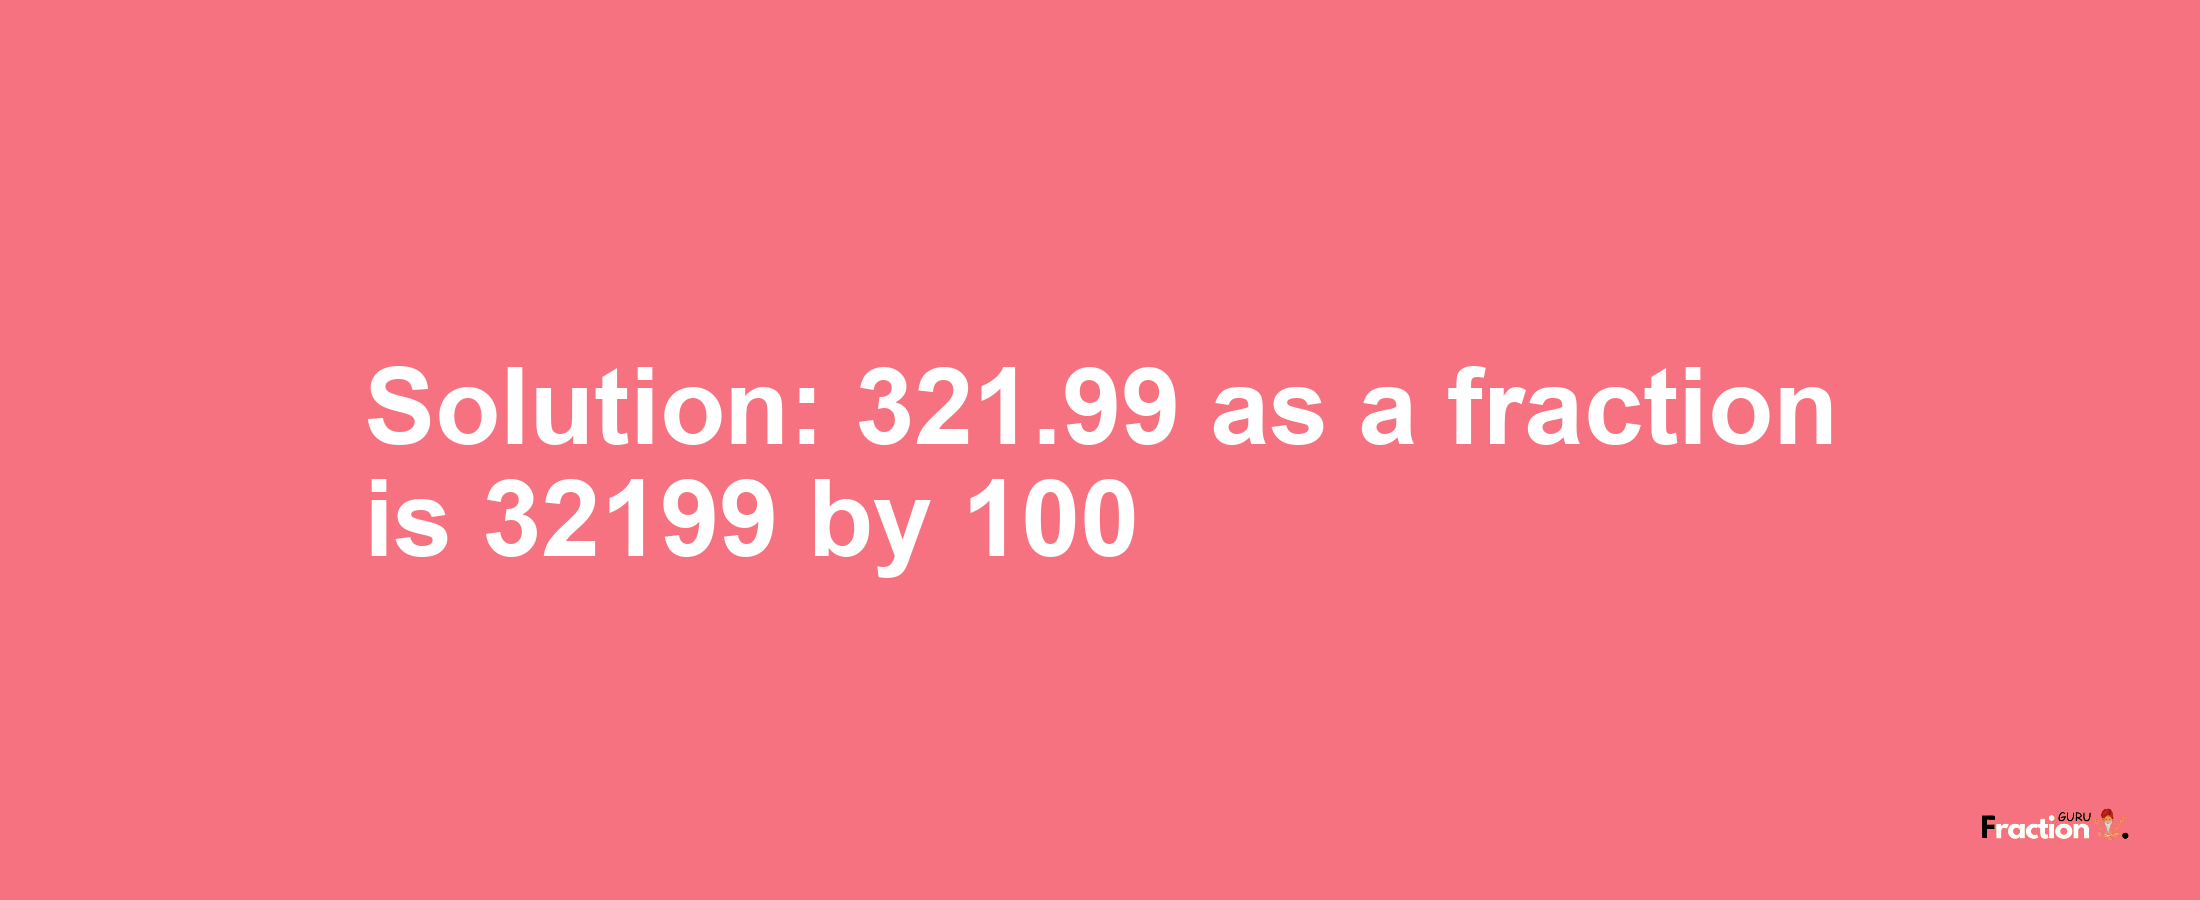 Solution:321.99 as a fraction is 32199/100